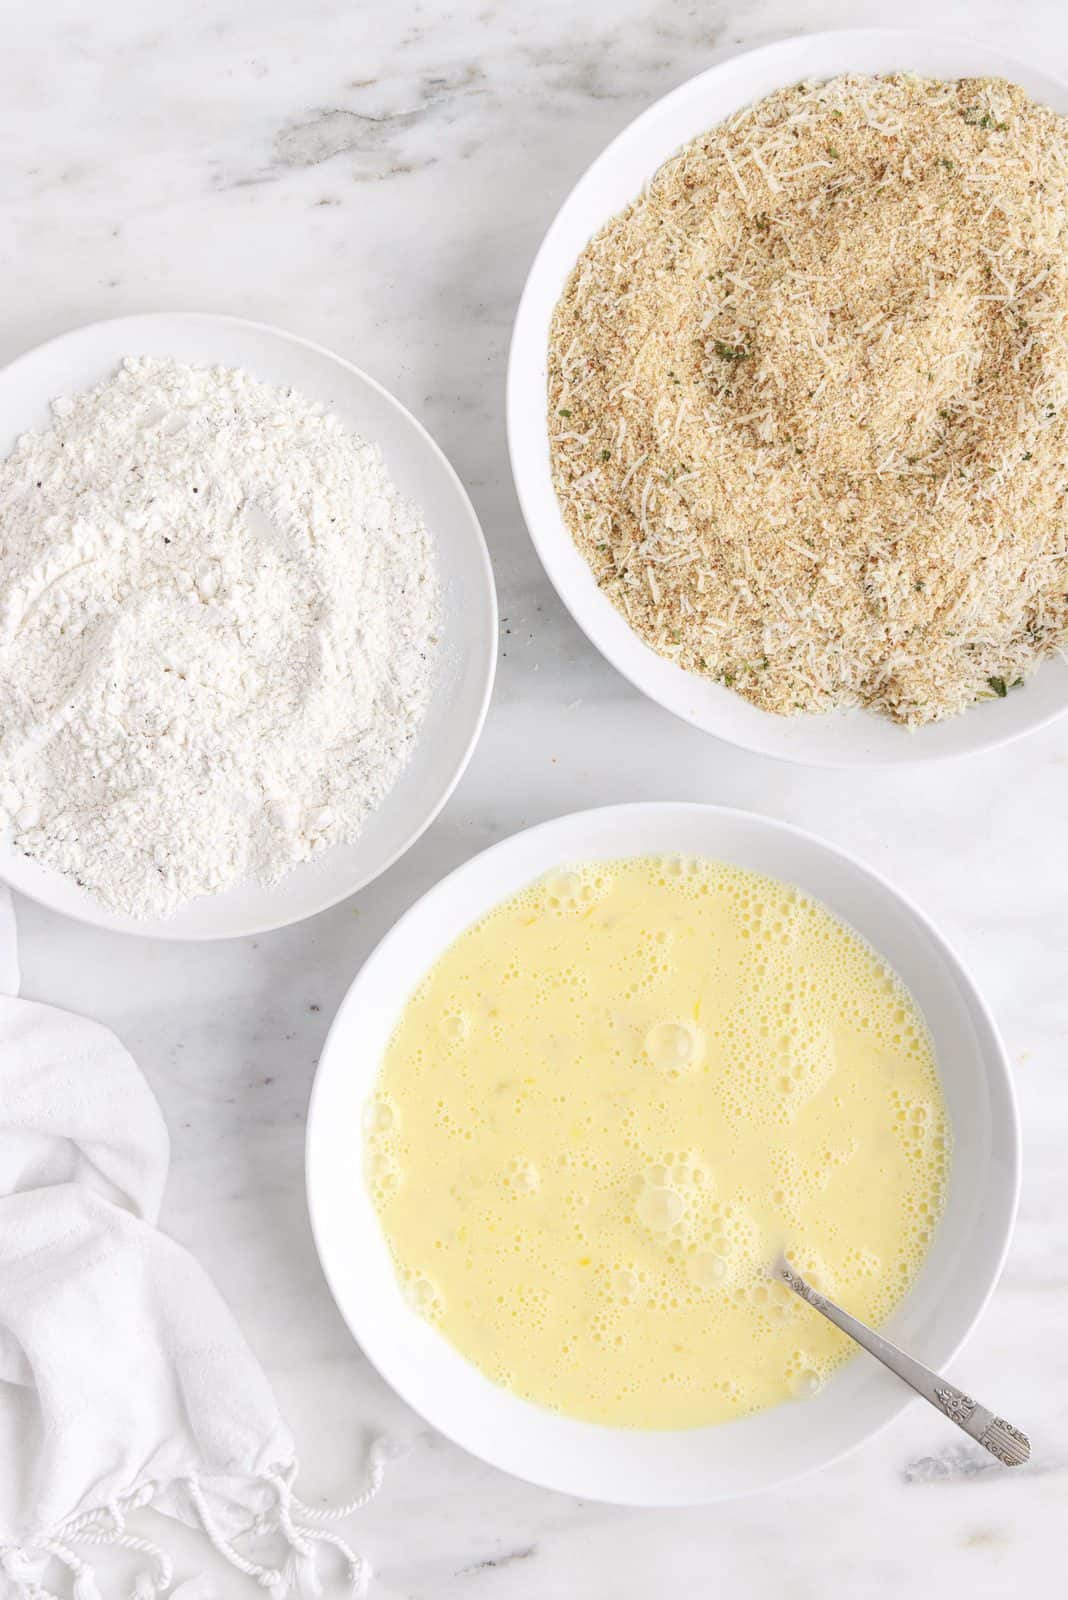 Flour, salt, and pepper combined in one dish. Milk and eggs combined together in a second dish. Breadcrumbs and cheese combined into a third dish.